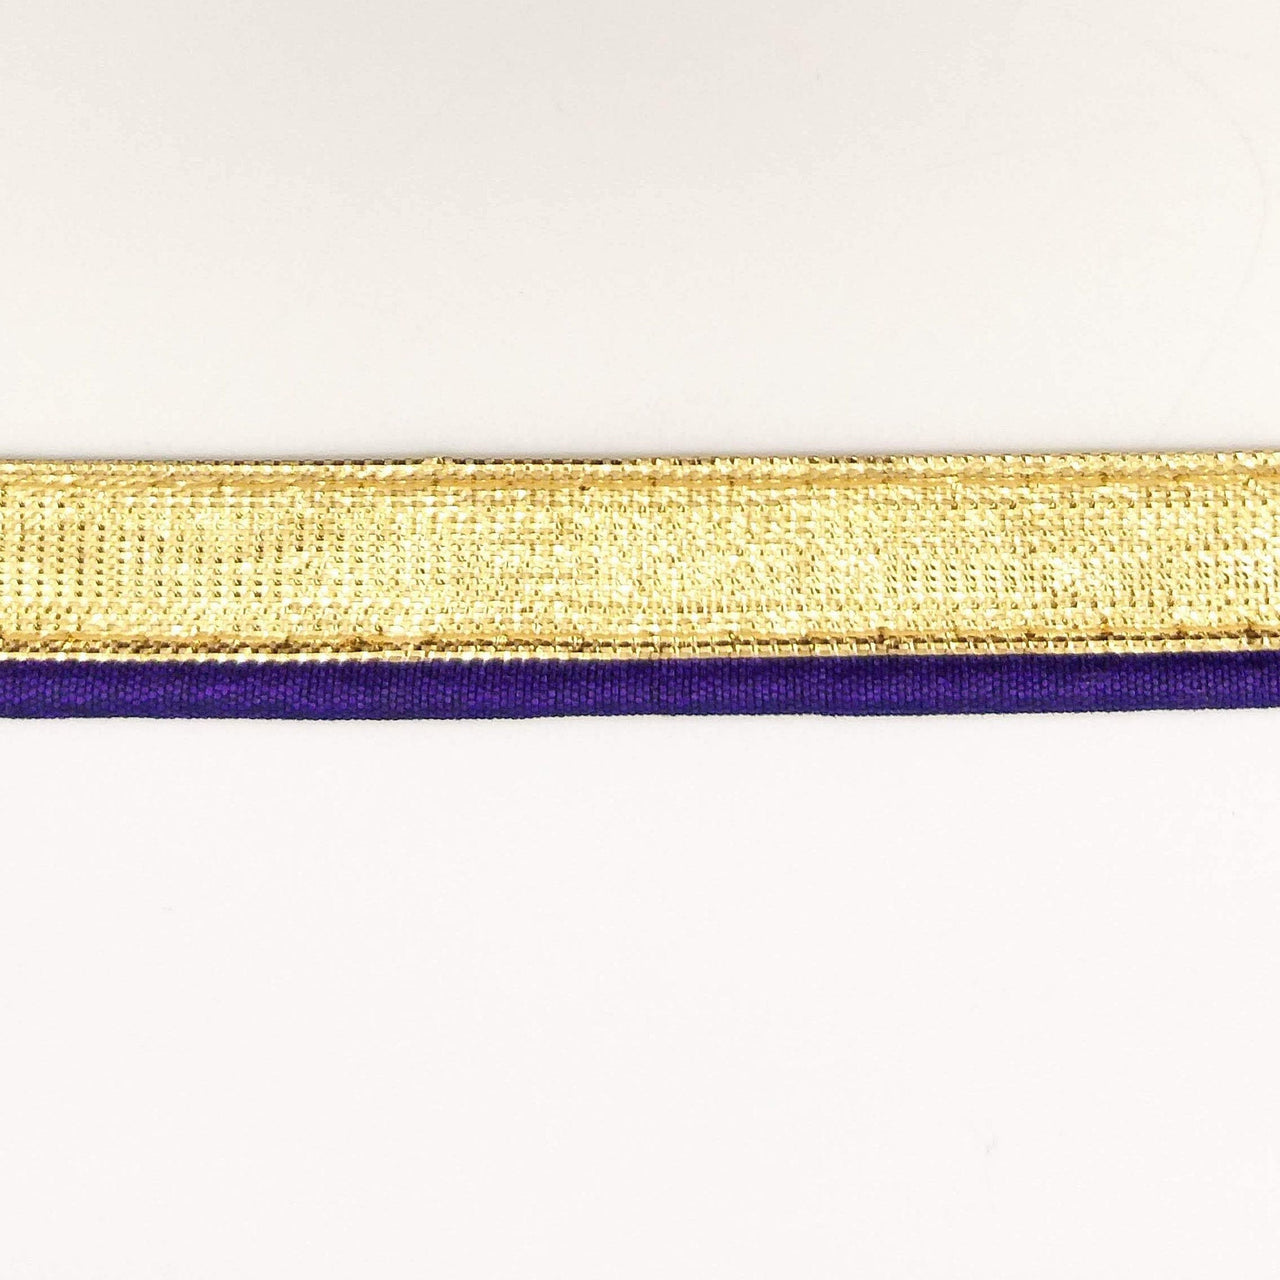 3 Yards, Flanged Insertion Gold Fabric Trim With Violet Piping, 15mm Cord piping Trim Decorative Sewing Edge Trim Flanged Piping Cord